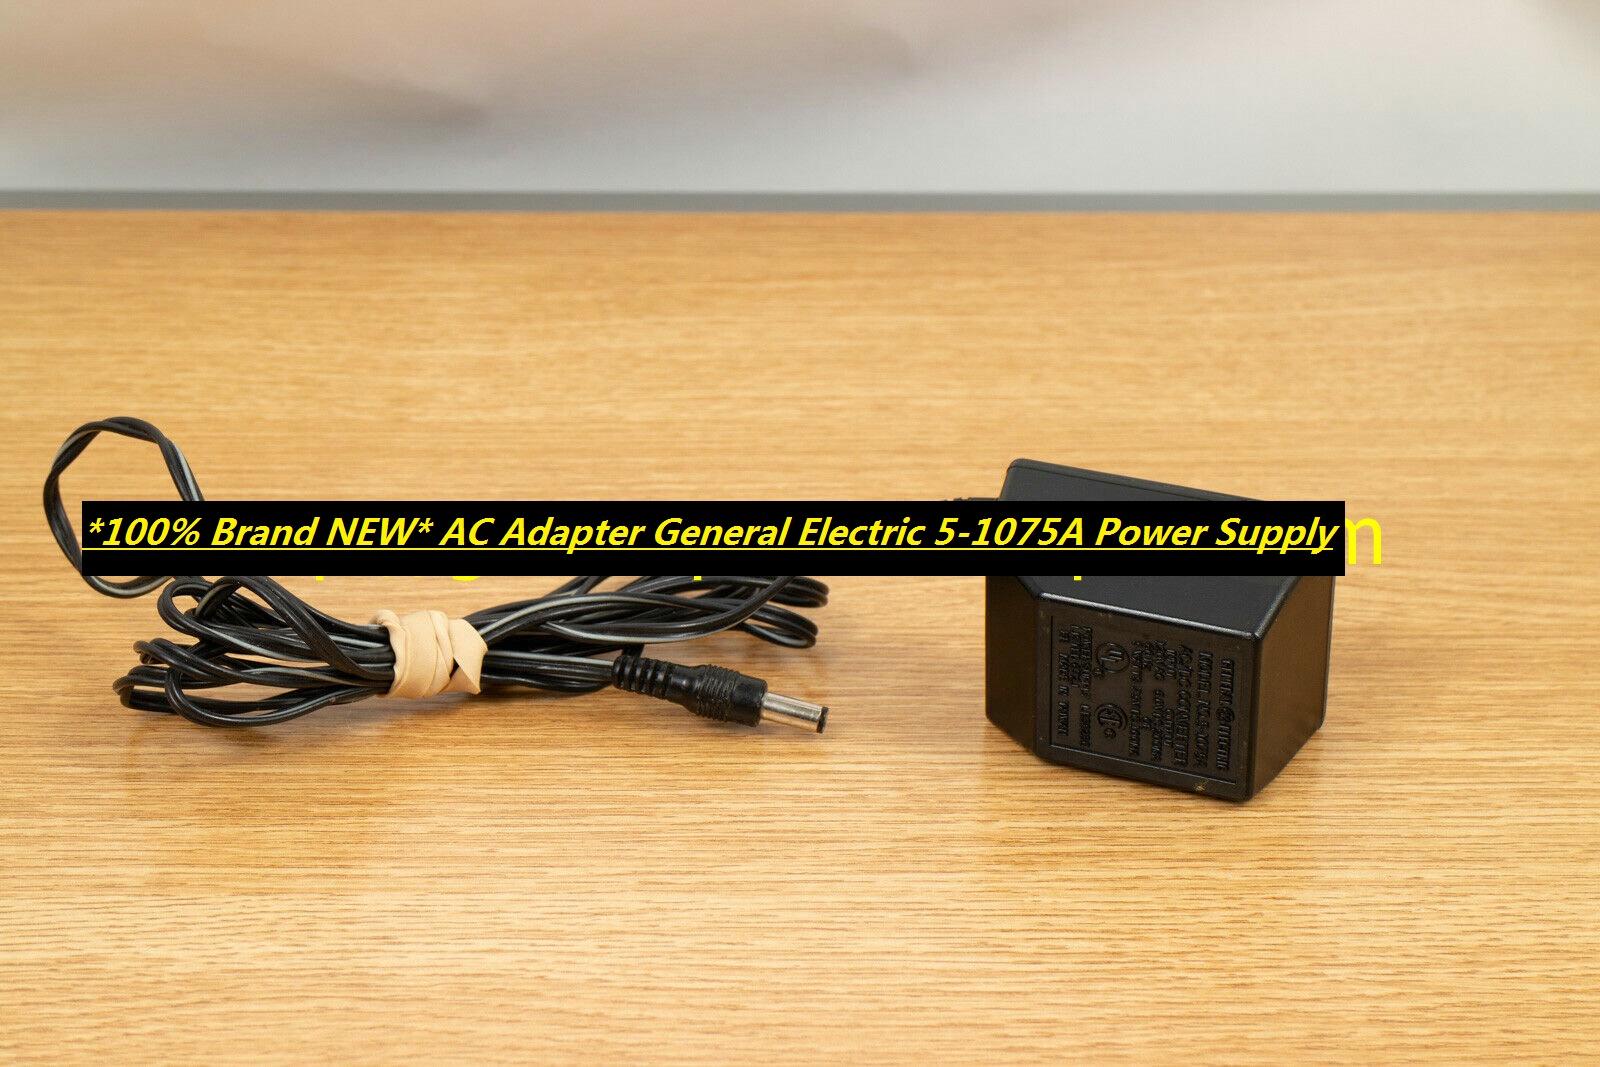 *100% Brand NEW* AC Adapter General Electric 5-1075A Power Supply - Click Image to Close